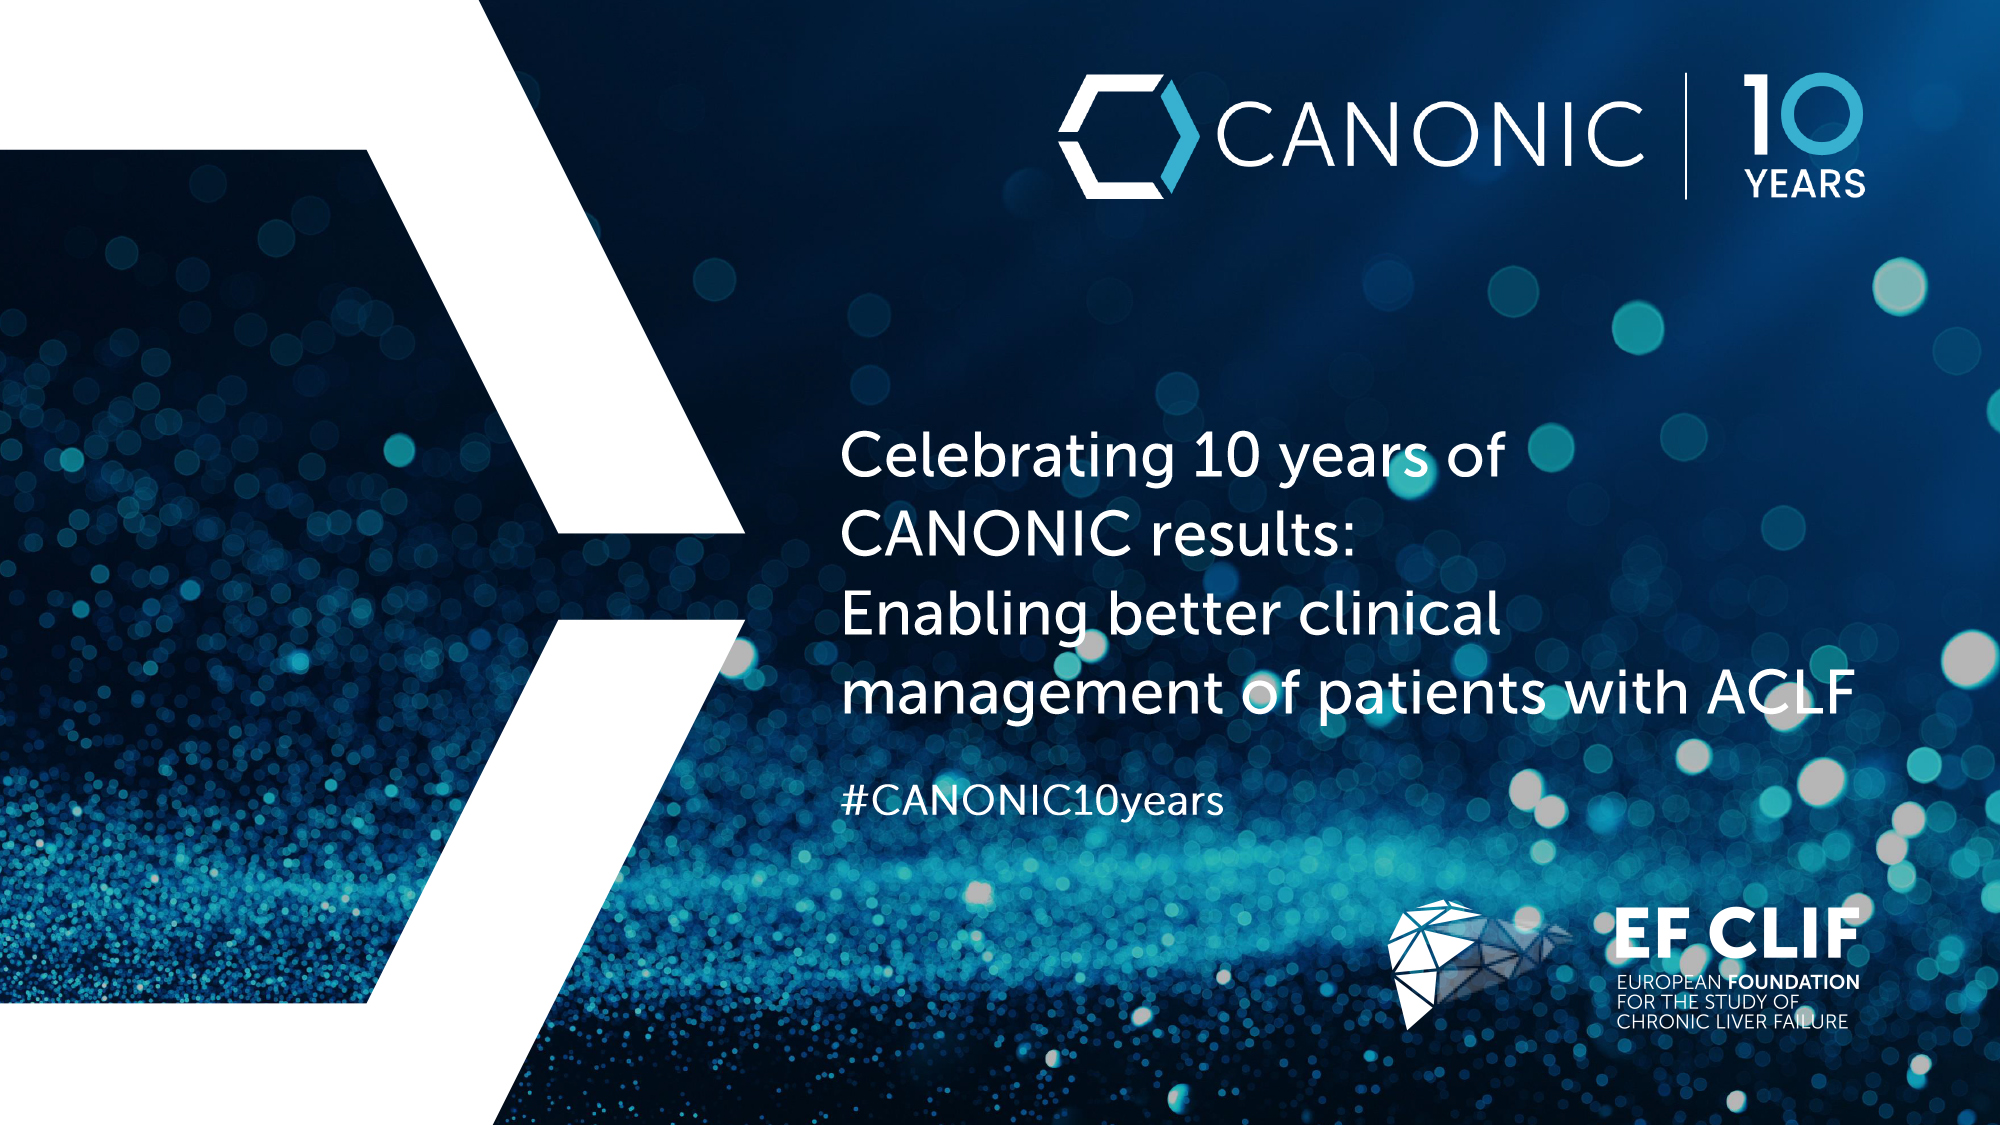 Celebrating 10 years of CANONIC: Enabling better clinical management of patients with ACLF